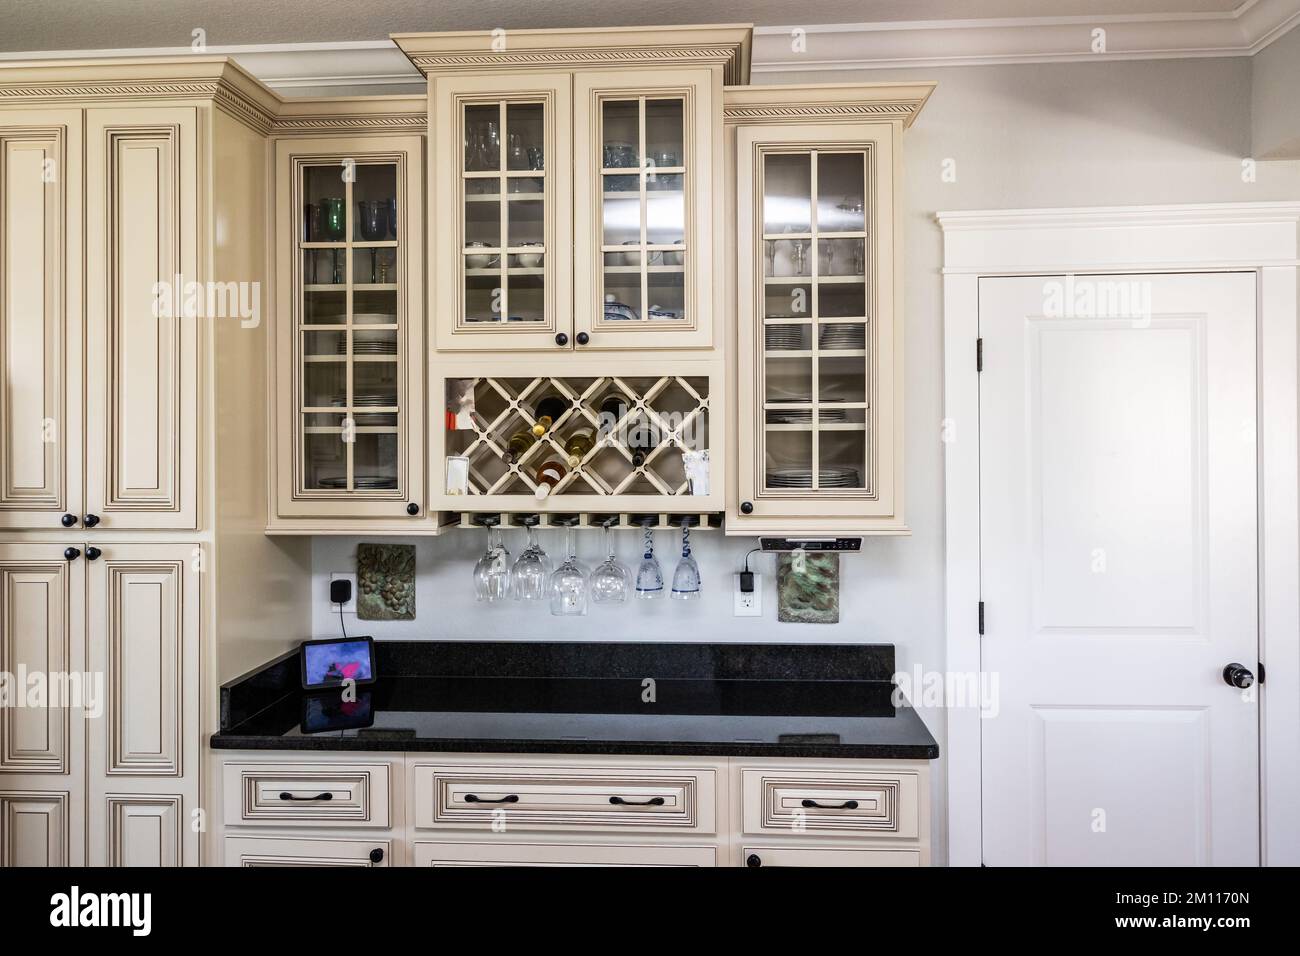 A cream colored new construction kitchen with black granite countertops clear glass cabinets and wine bottle storage Stock Photo